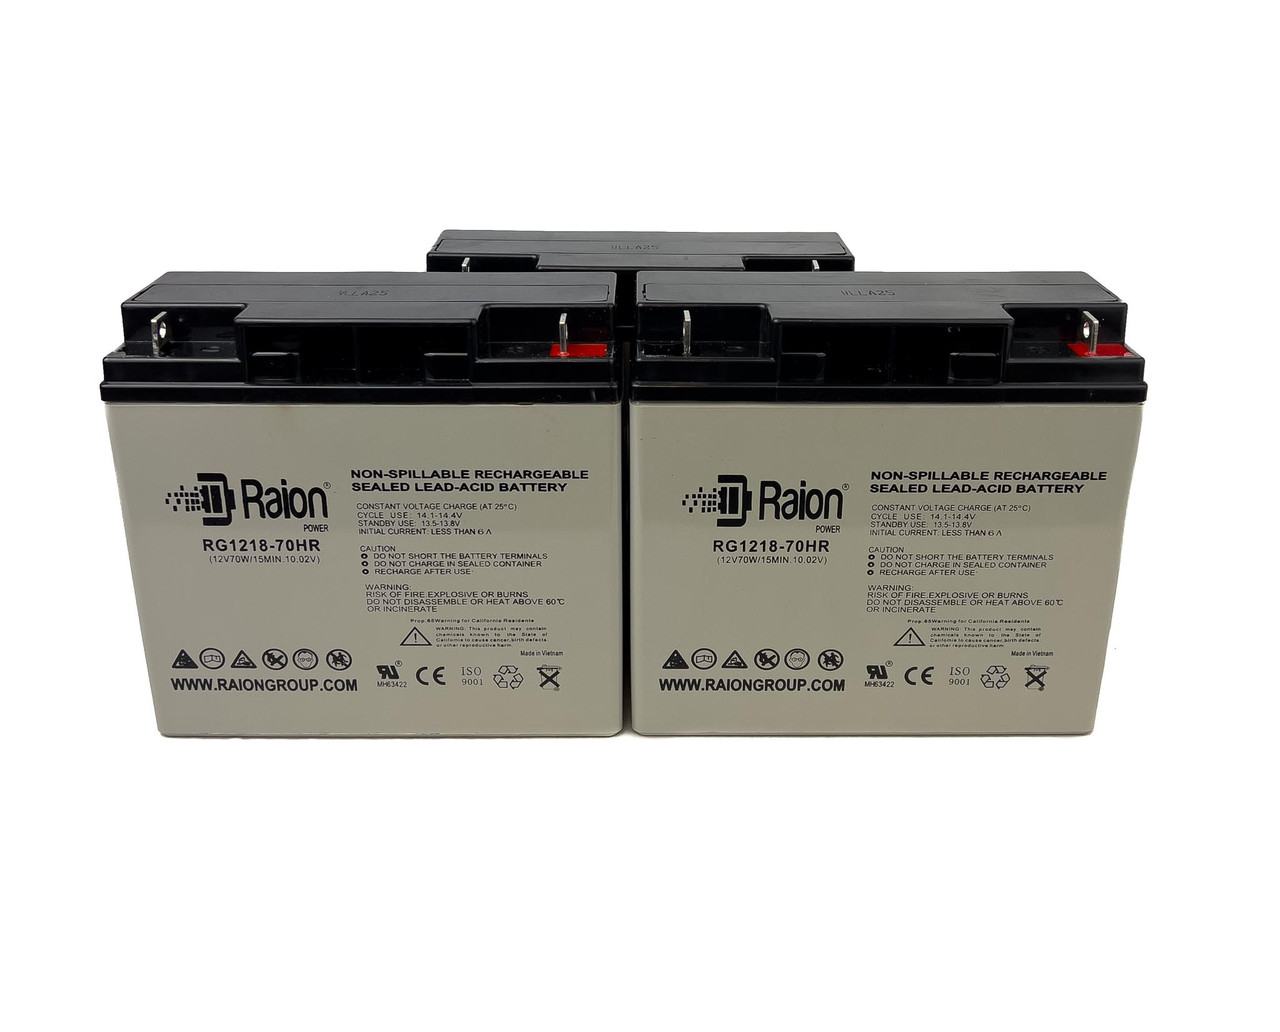 Raion Power RG1218-70HR 12V 18Ah Replacement UPS Battery for Alpha Technologies ALIBP1500T (033-747-10) - 3 Pack